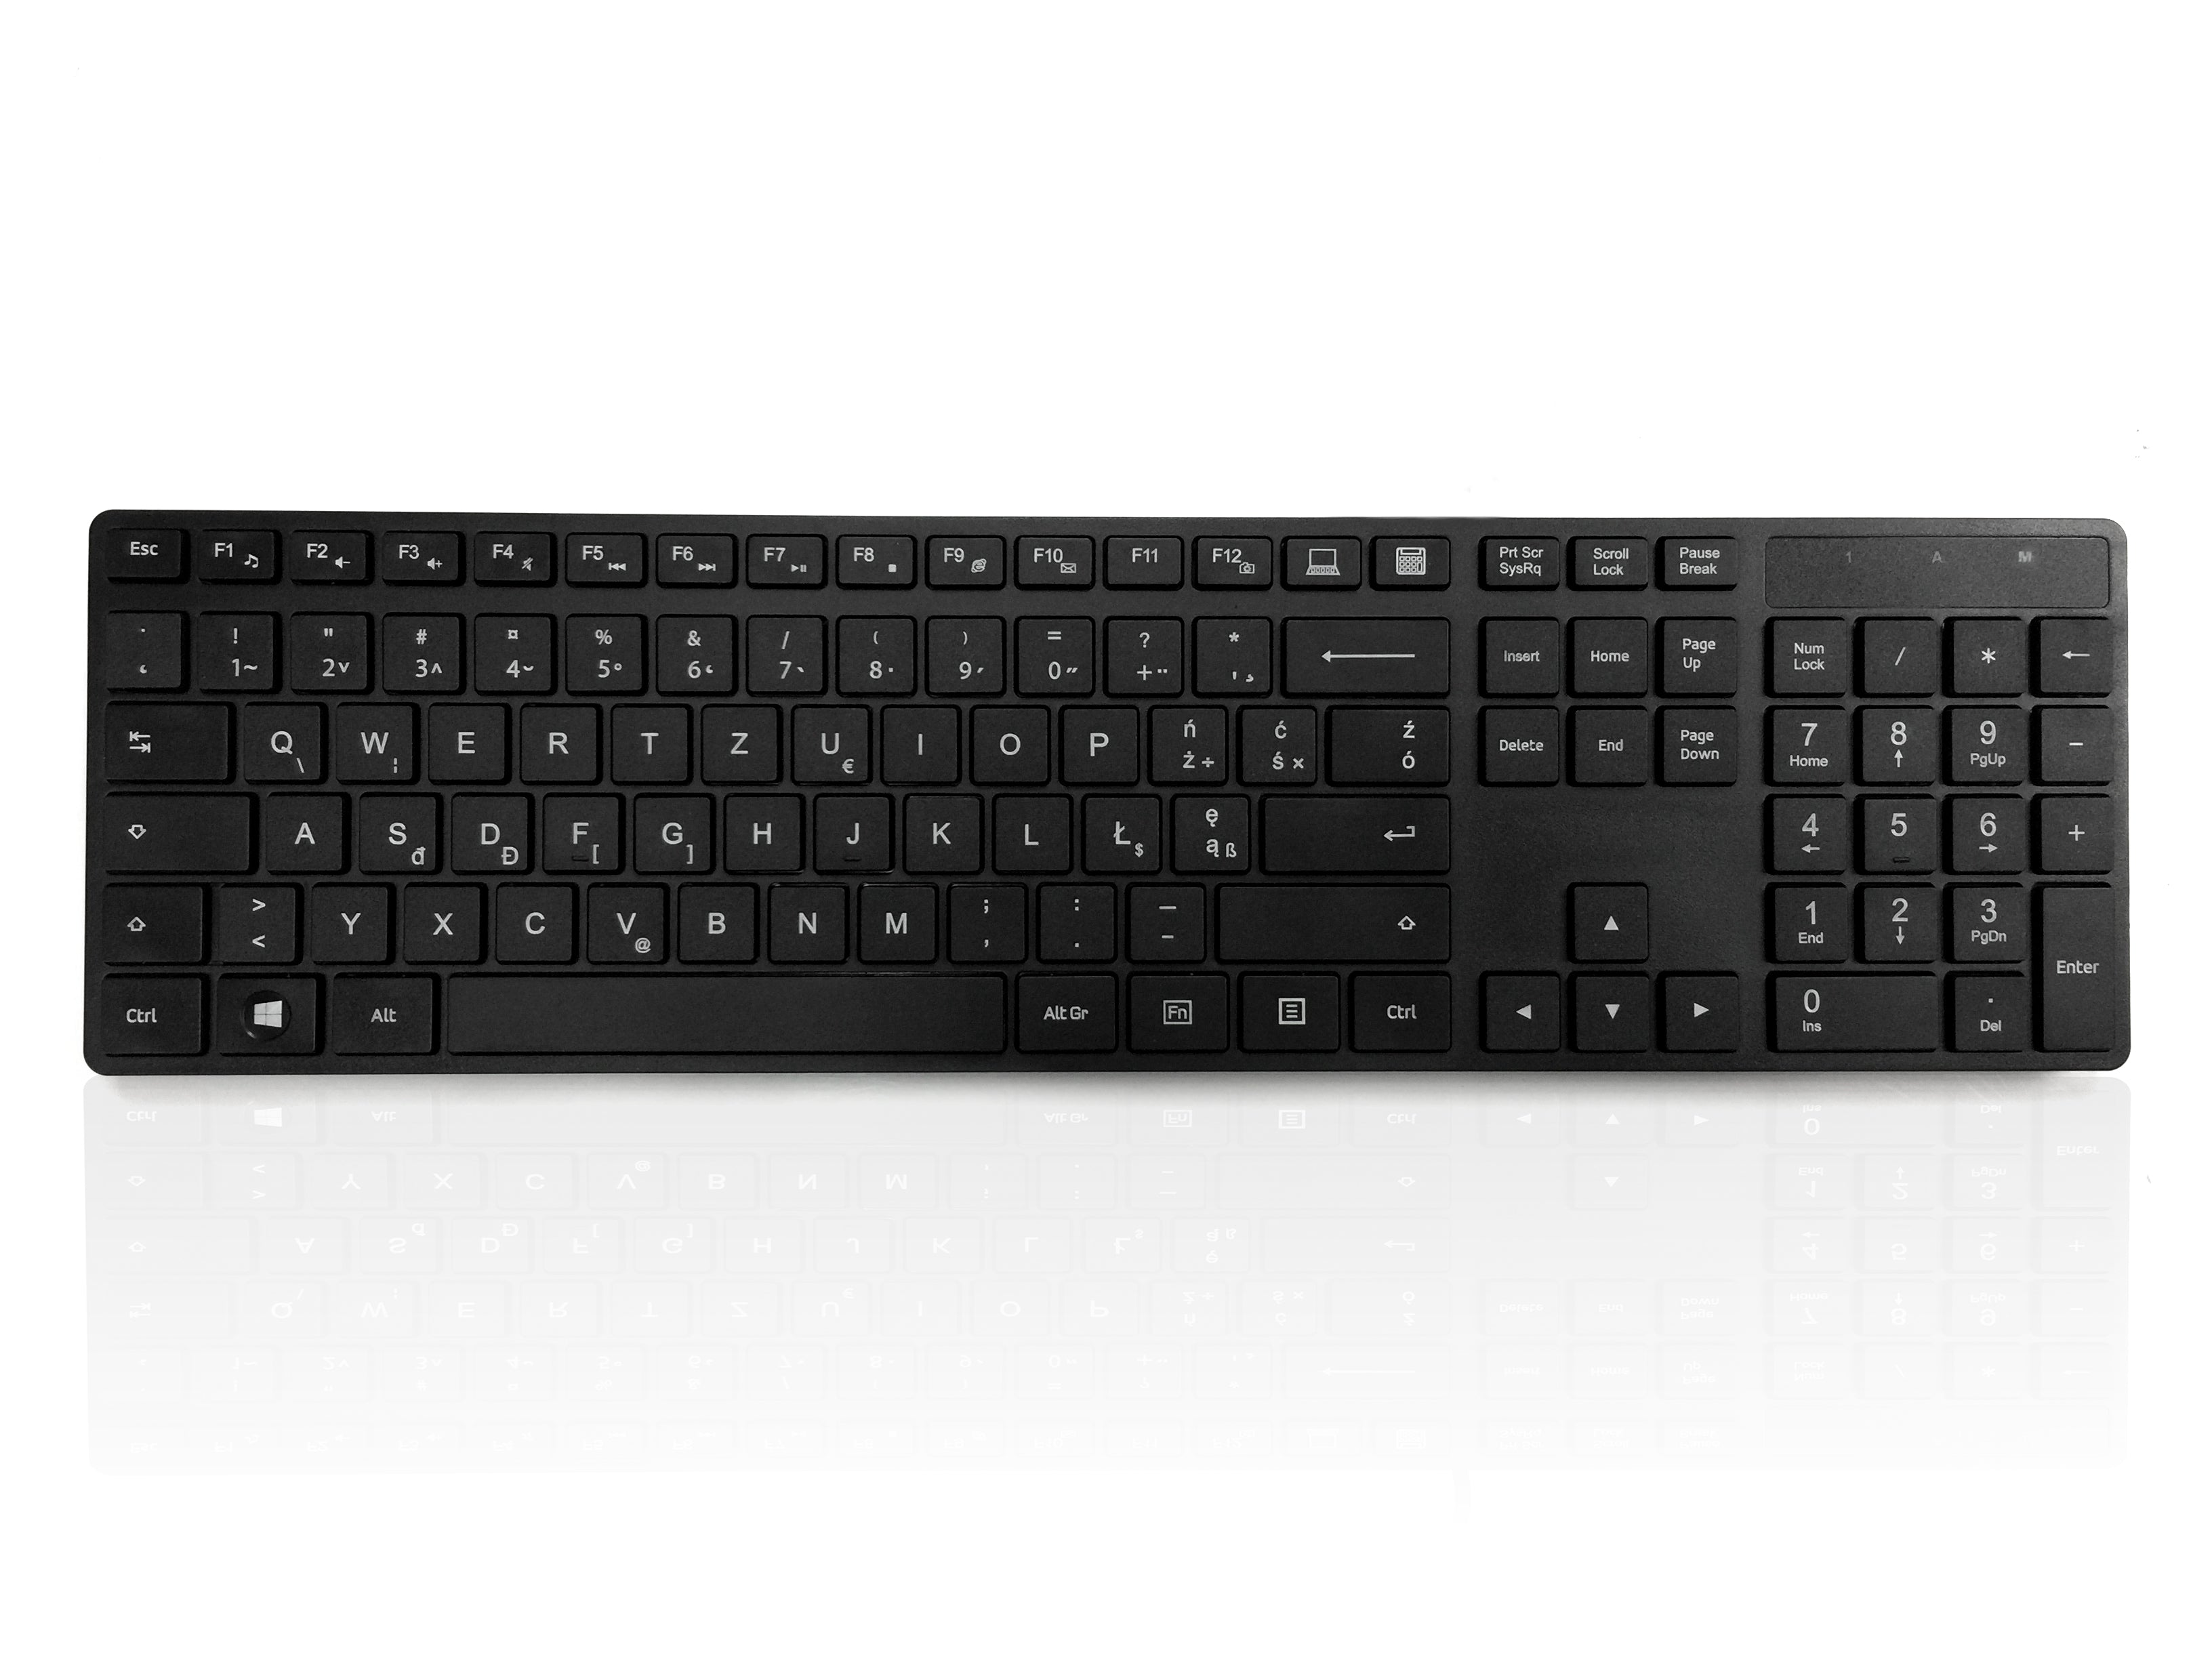 Accuratus 301 - PS/2 Full Size Super Slim Multimedia Keyboard with Square Modern Keys in Black